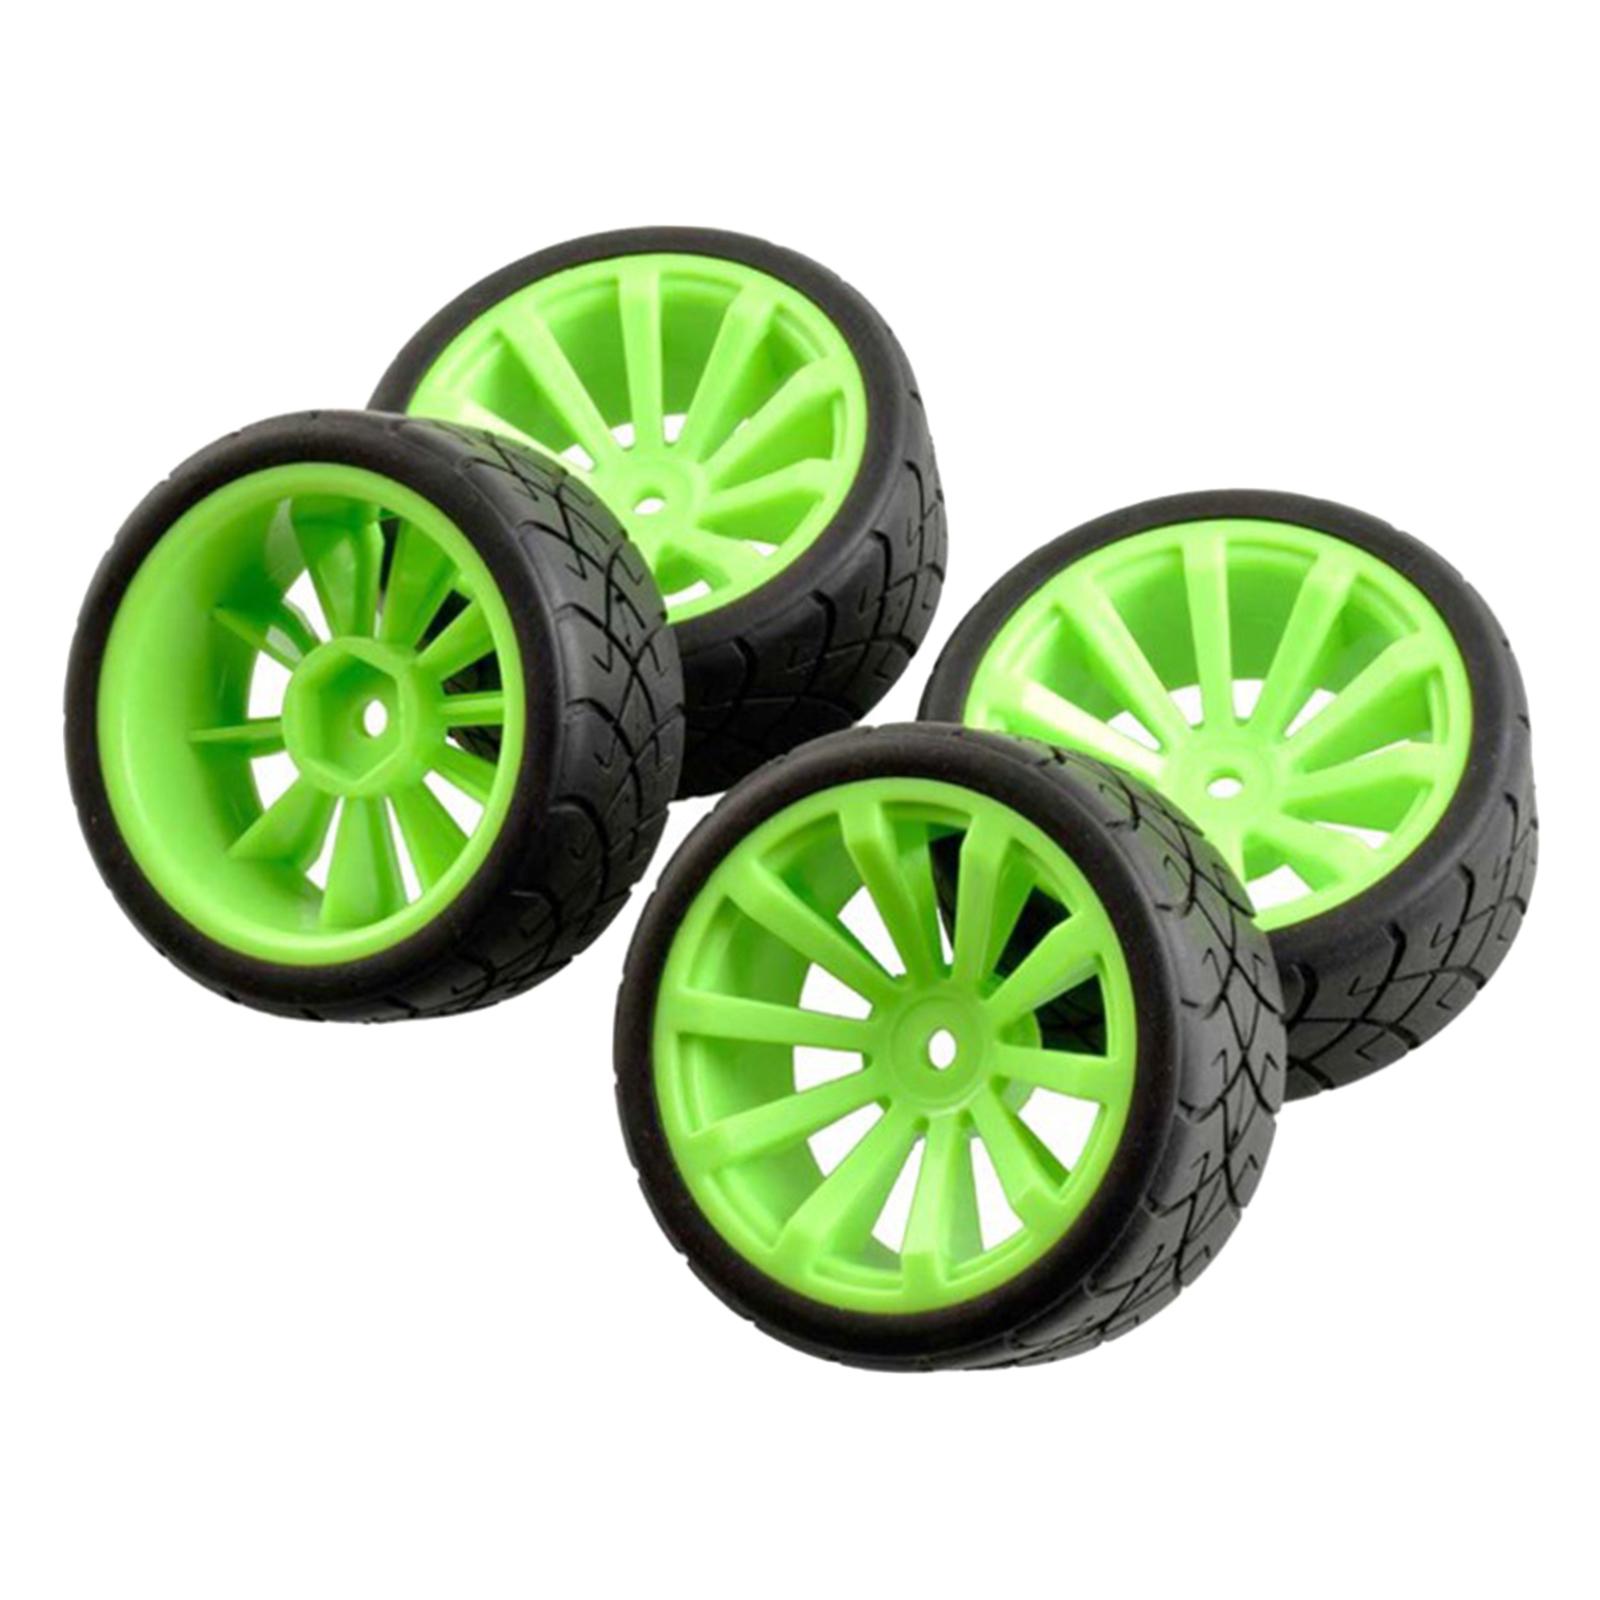 4 Pieces 144001124018124019 for 1:10 Rubber Tire RC Car , Green - image 1 of 7